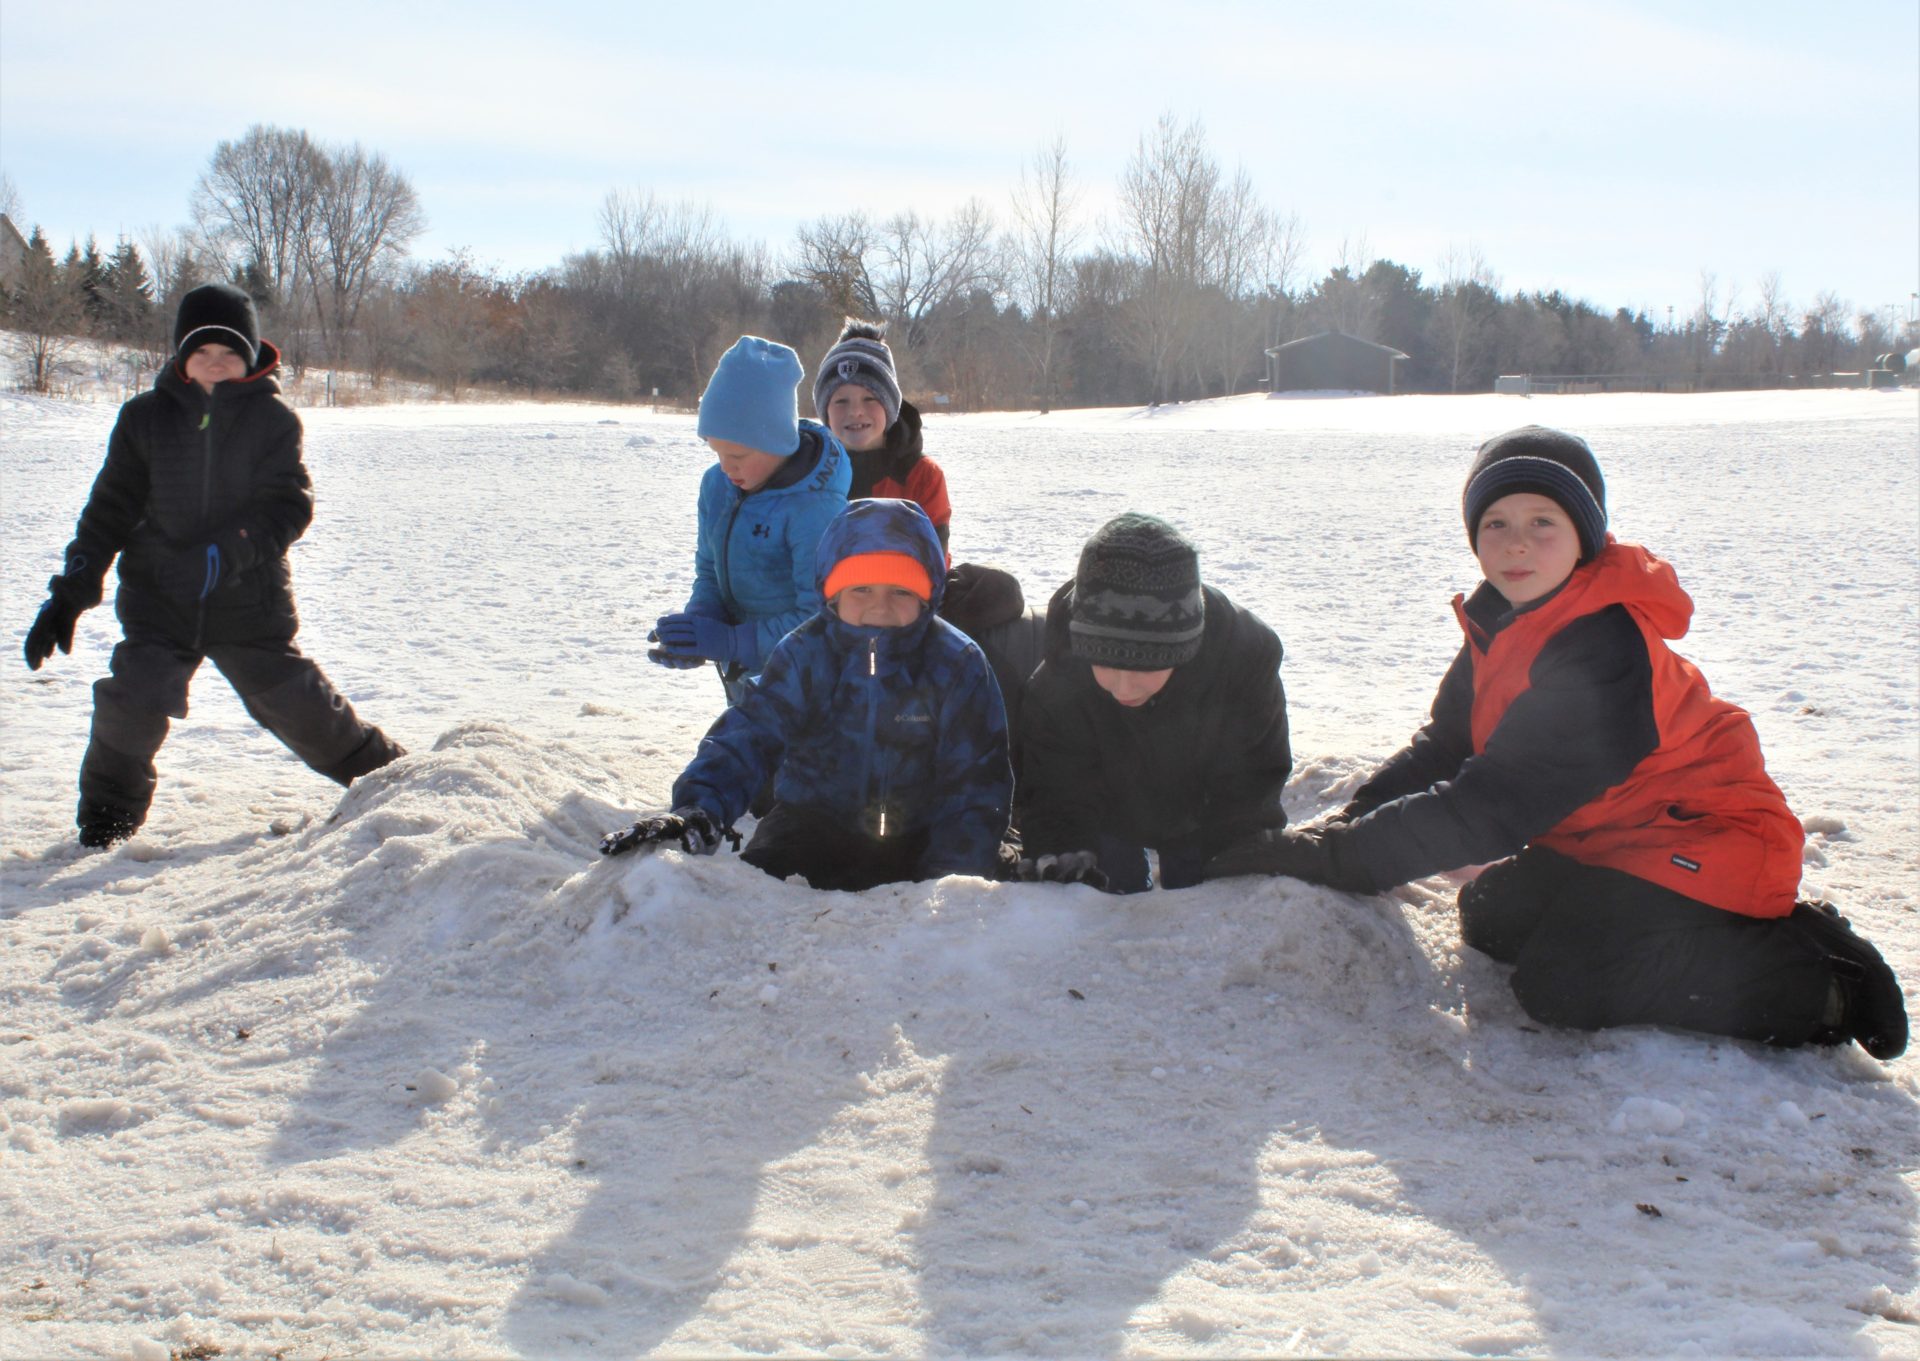 A group of boys playing in the snow.